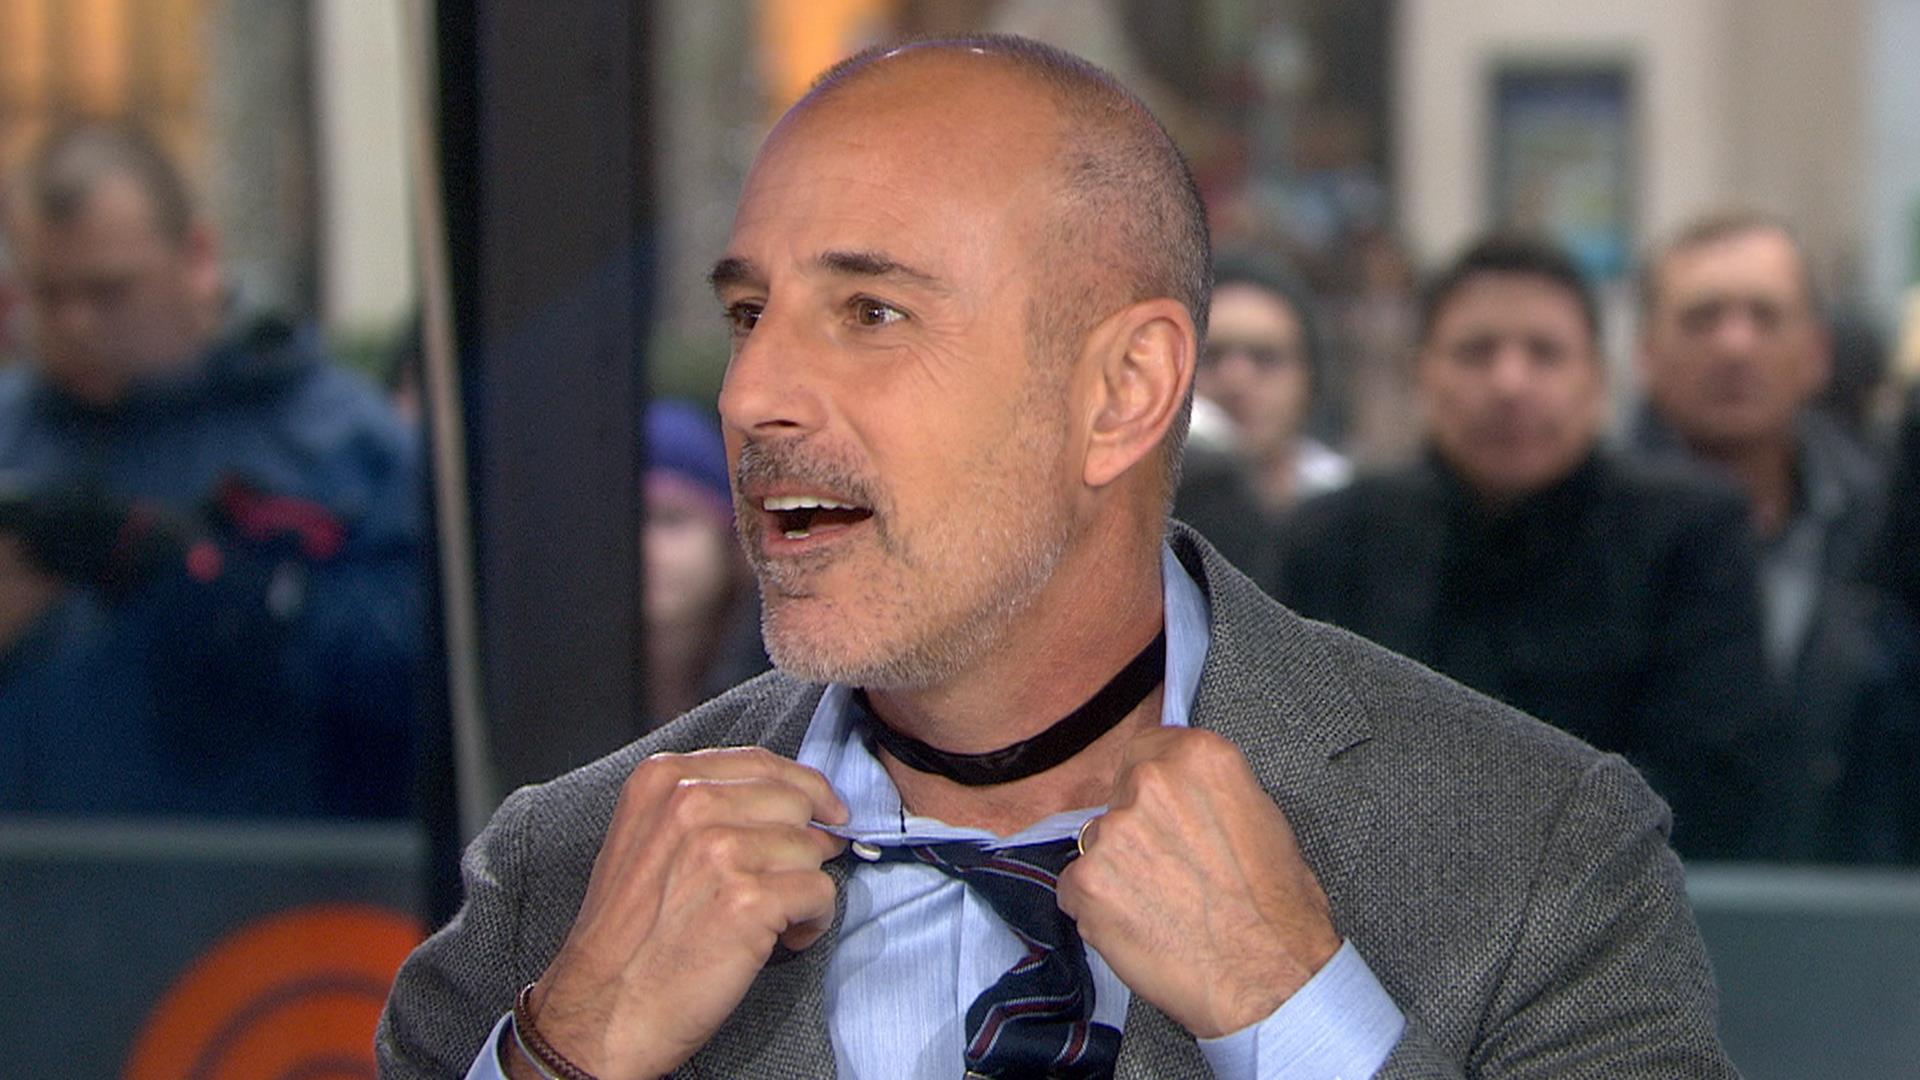 Cruelty Kakadu Solrig Matt Lauer wore a choker necklace and nothing will ever be the same